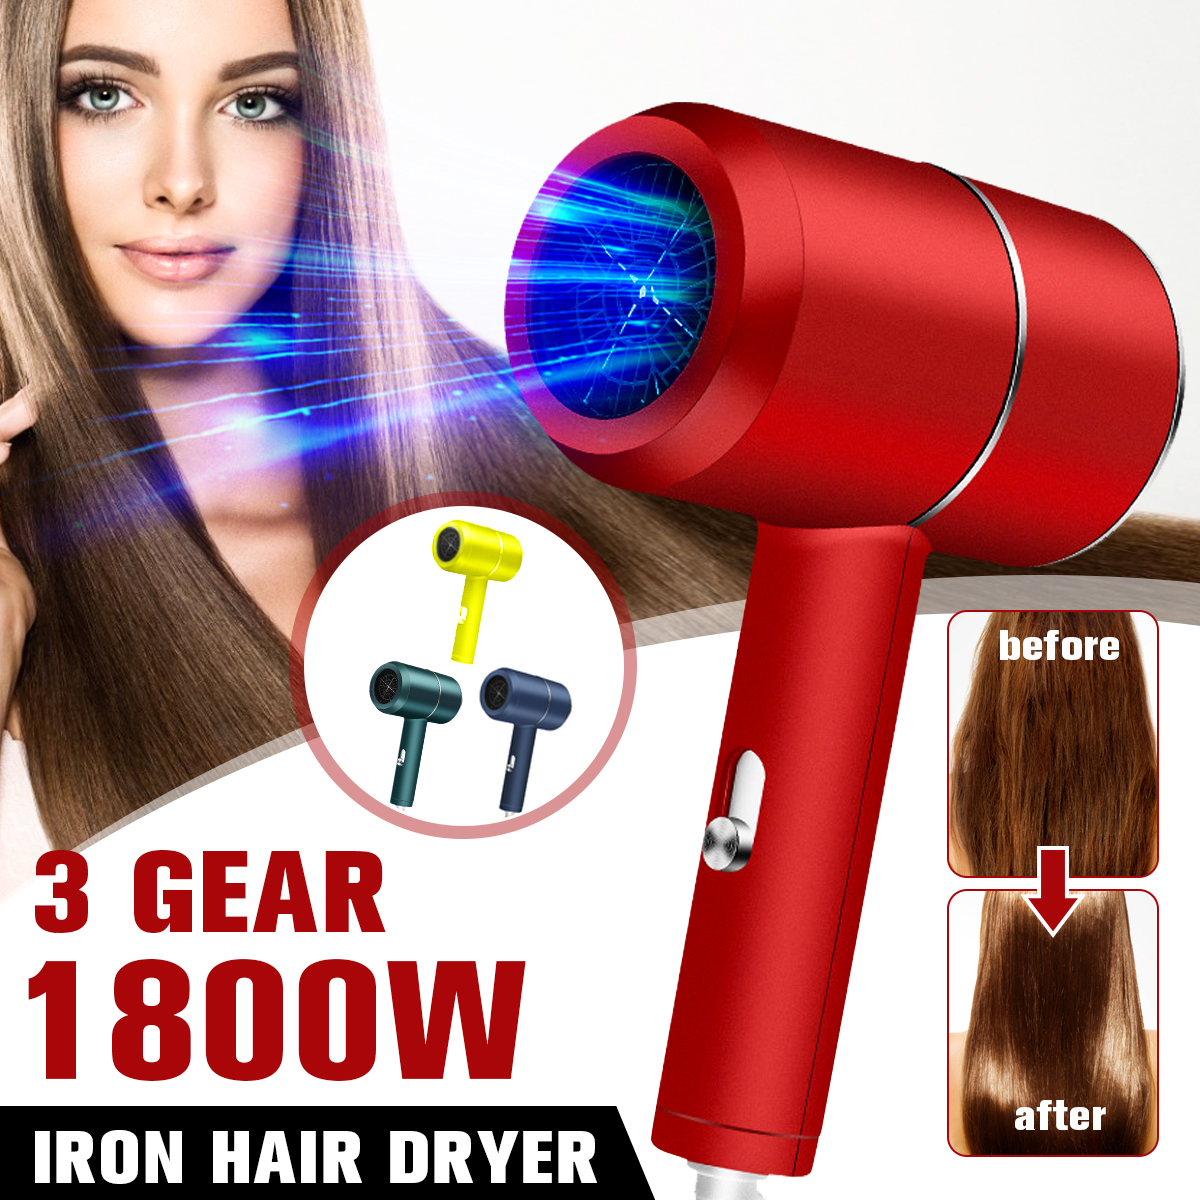 1800W-220V-Professional-Hairdressing-Salon-Electric-Hair-Dryer-3-Speed-Adjustable-Uniform-Quick-dry--1806218-1